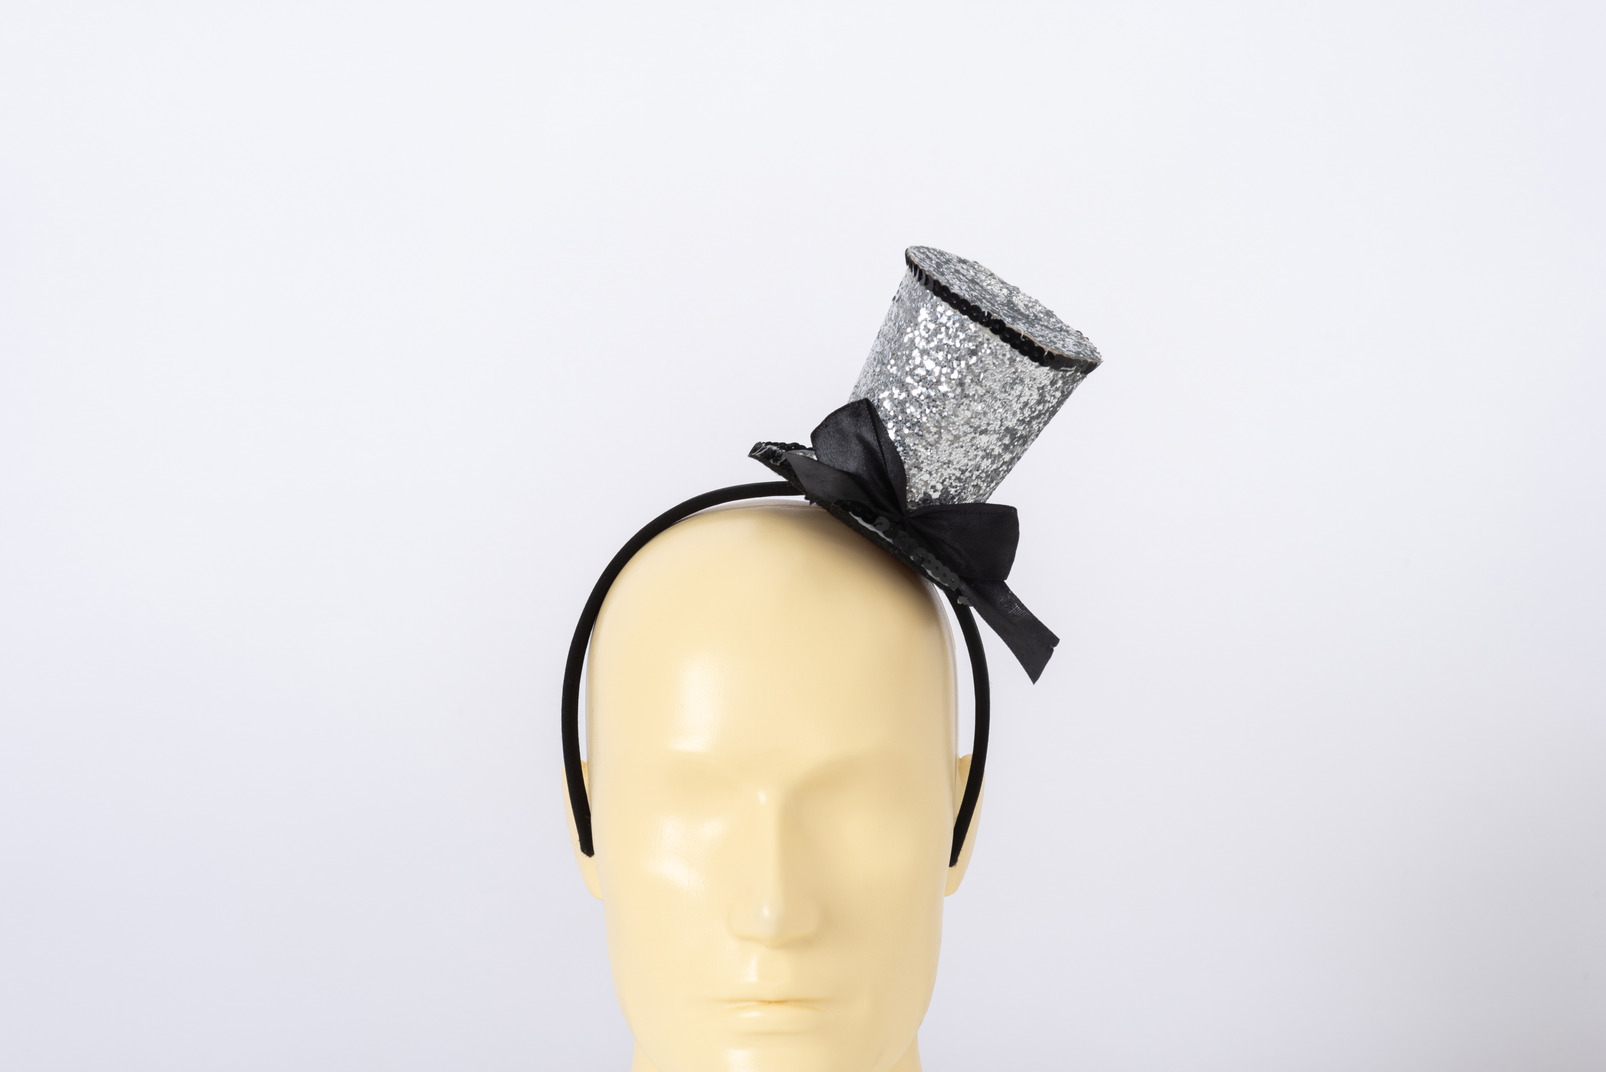 Small silver top hat with a bow on a mannequin head